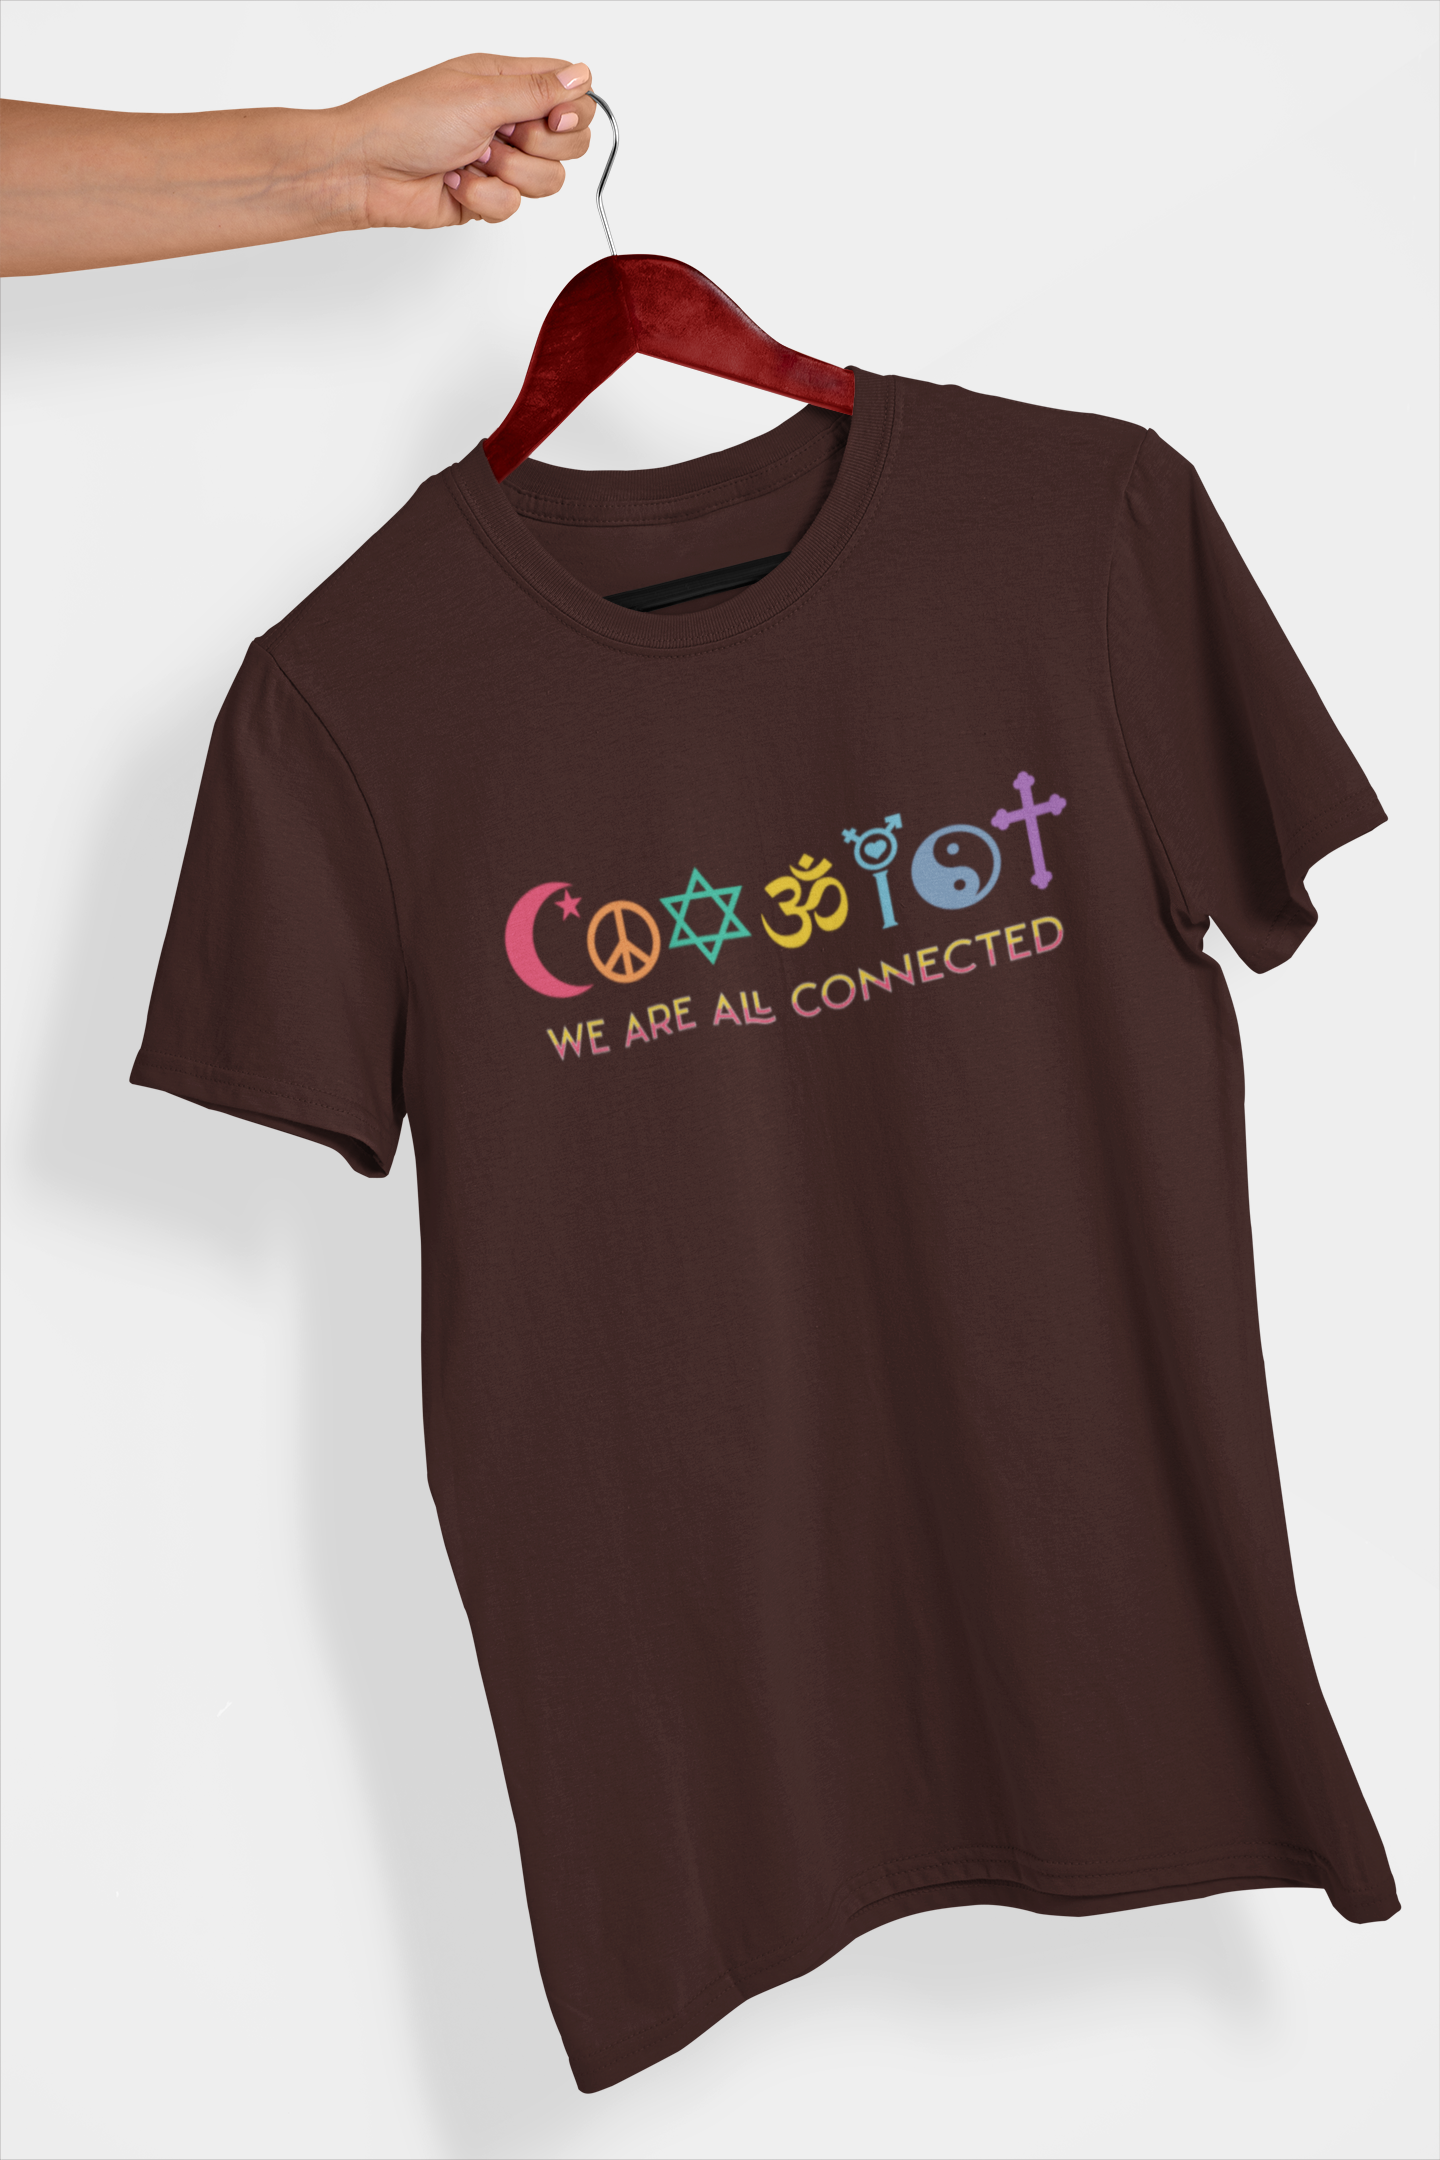 We Are All Connected Men's Printed T-shirt Espresso Brown High & Humble